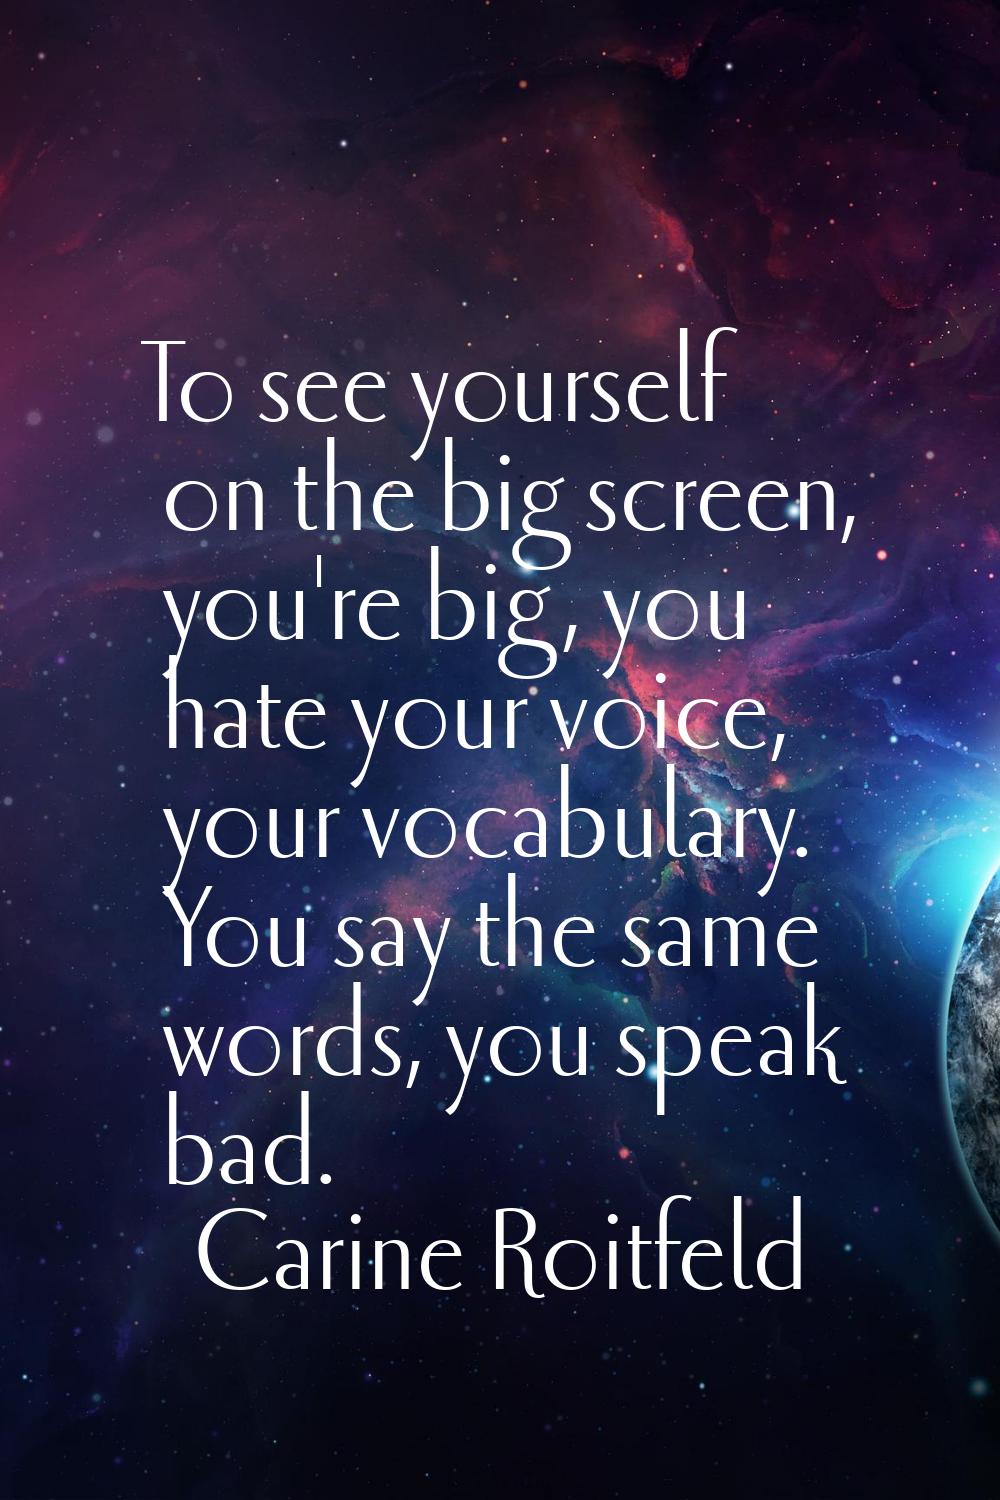 To see yourself on the big screen, you're big, you hate your voice, your vocabulary. You say the sa